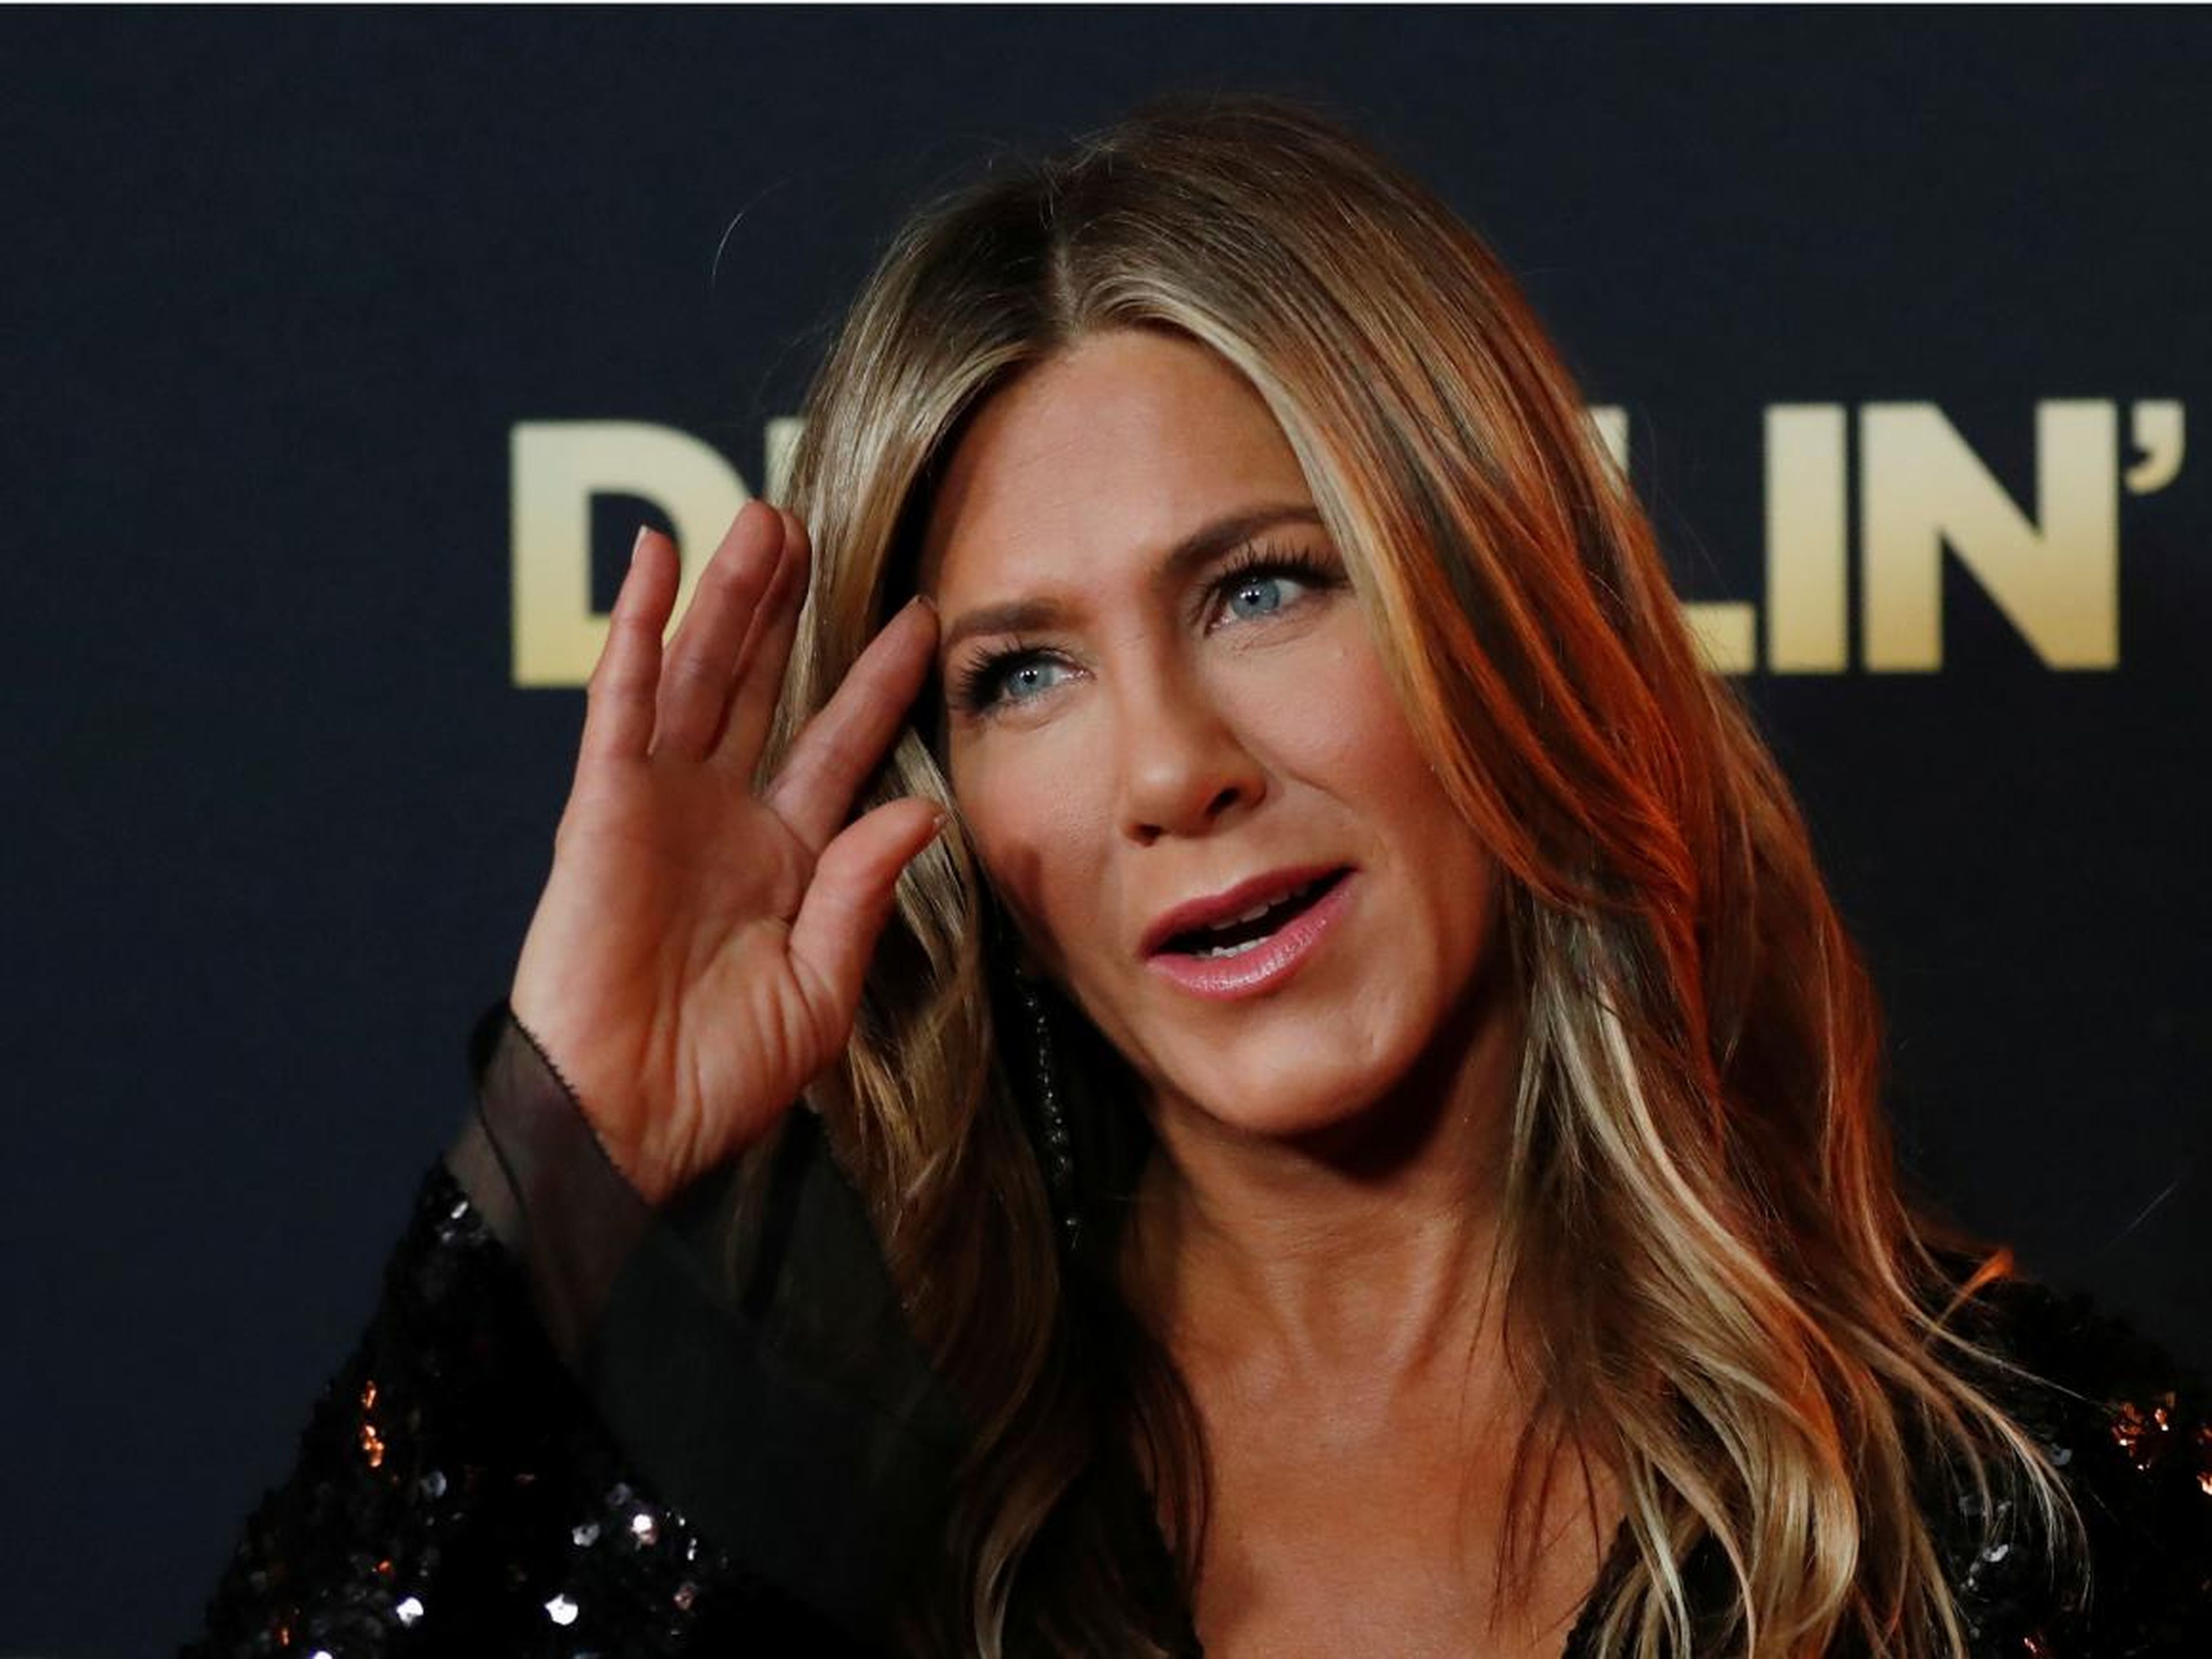 By the time "Friends" wrapped in 2004, Aniston made close to $1.25 million per episode, Forbes estimates.